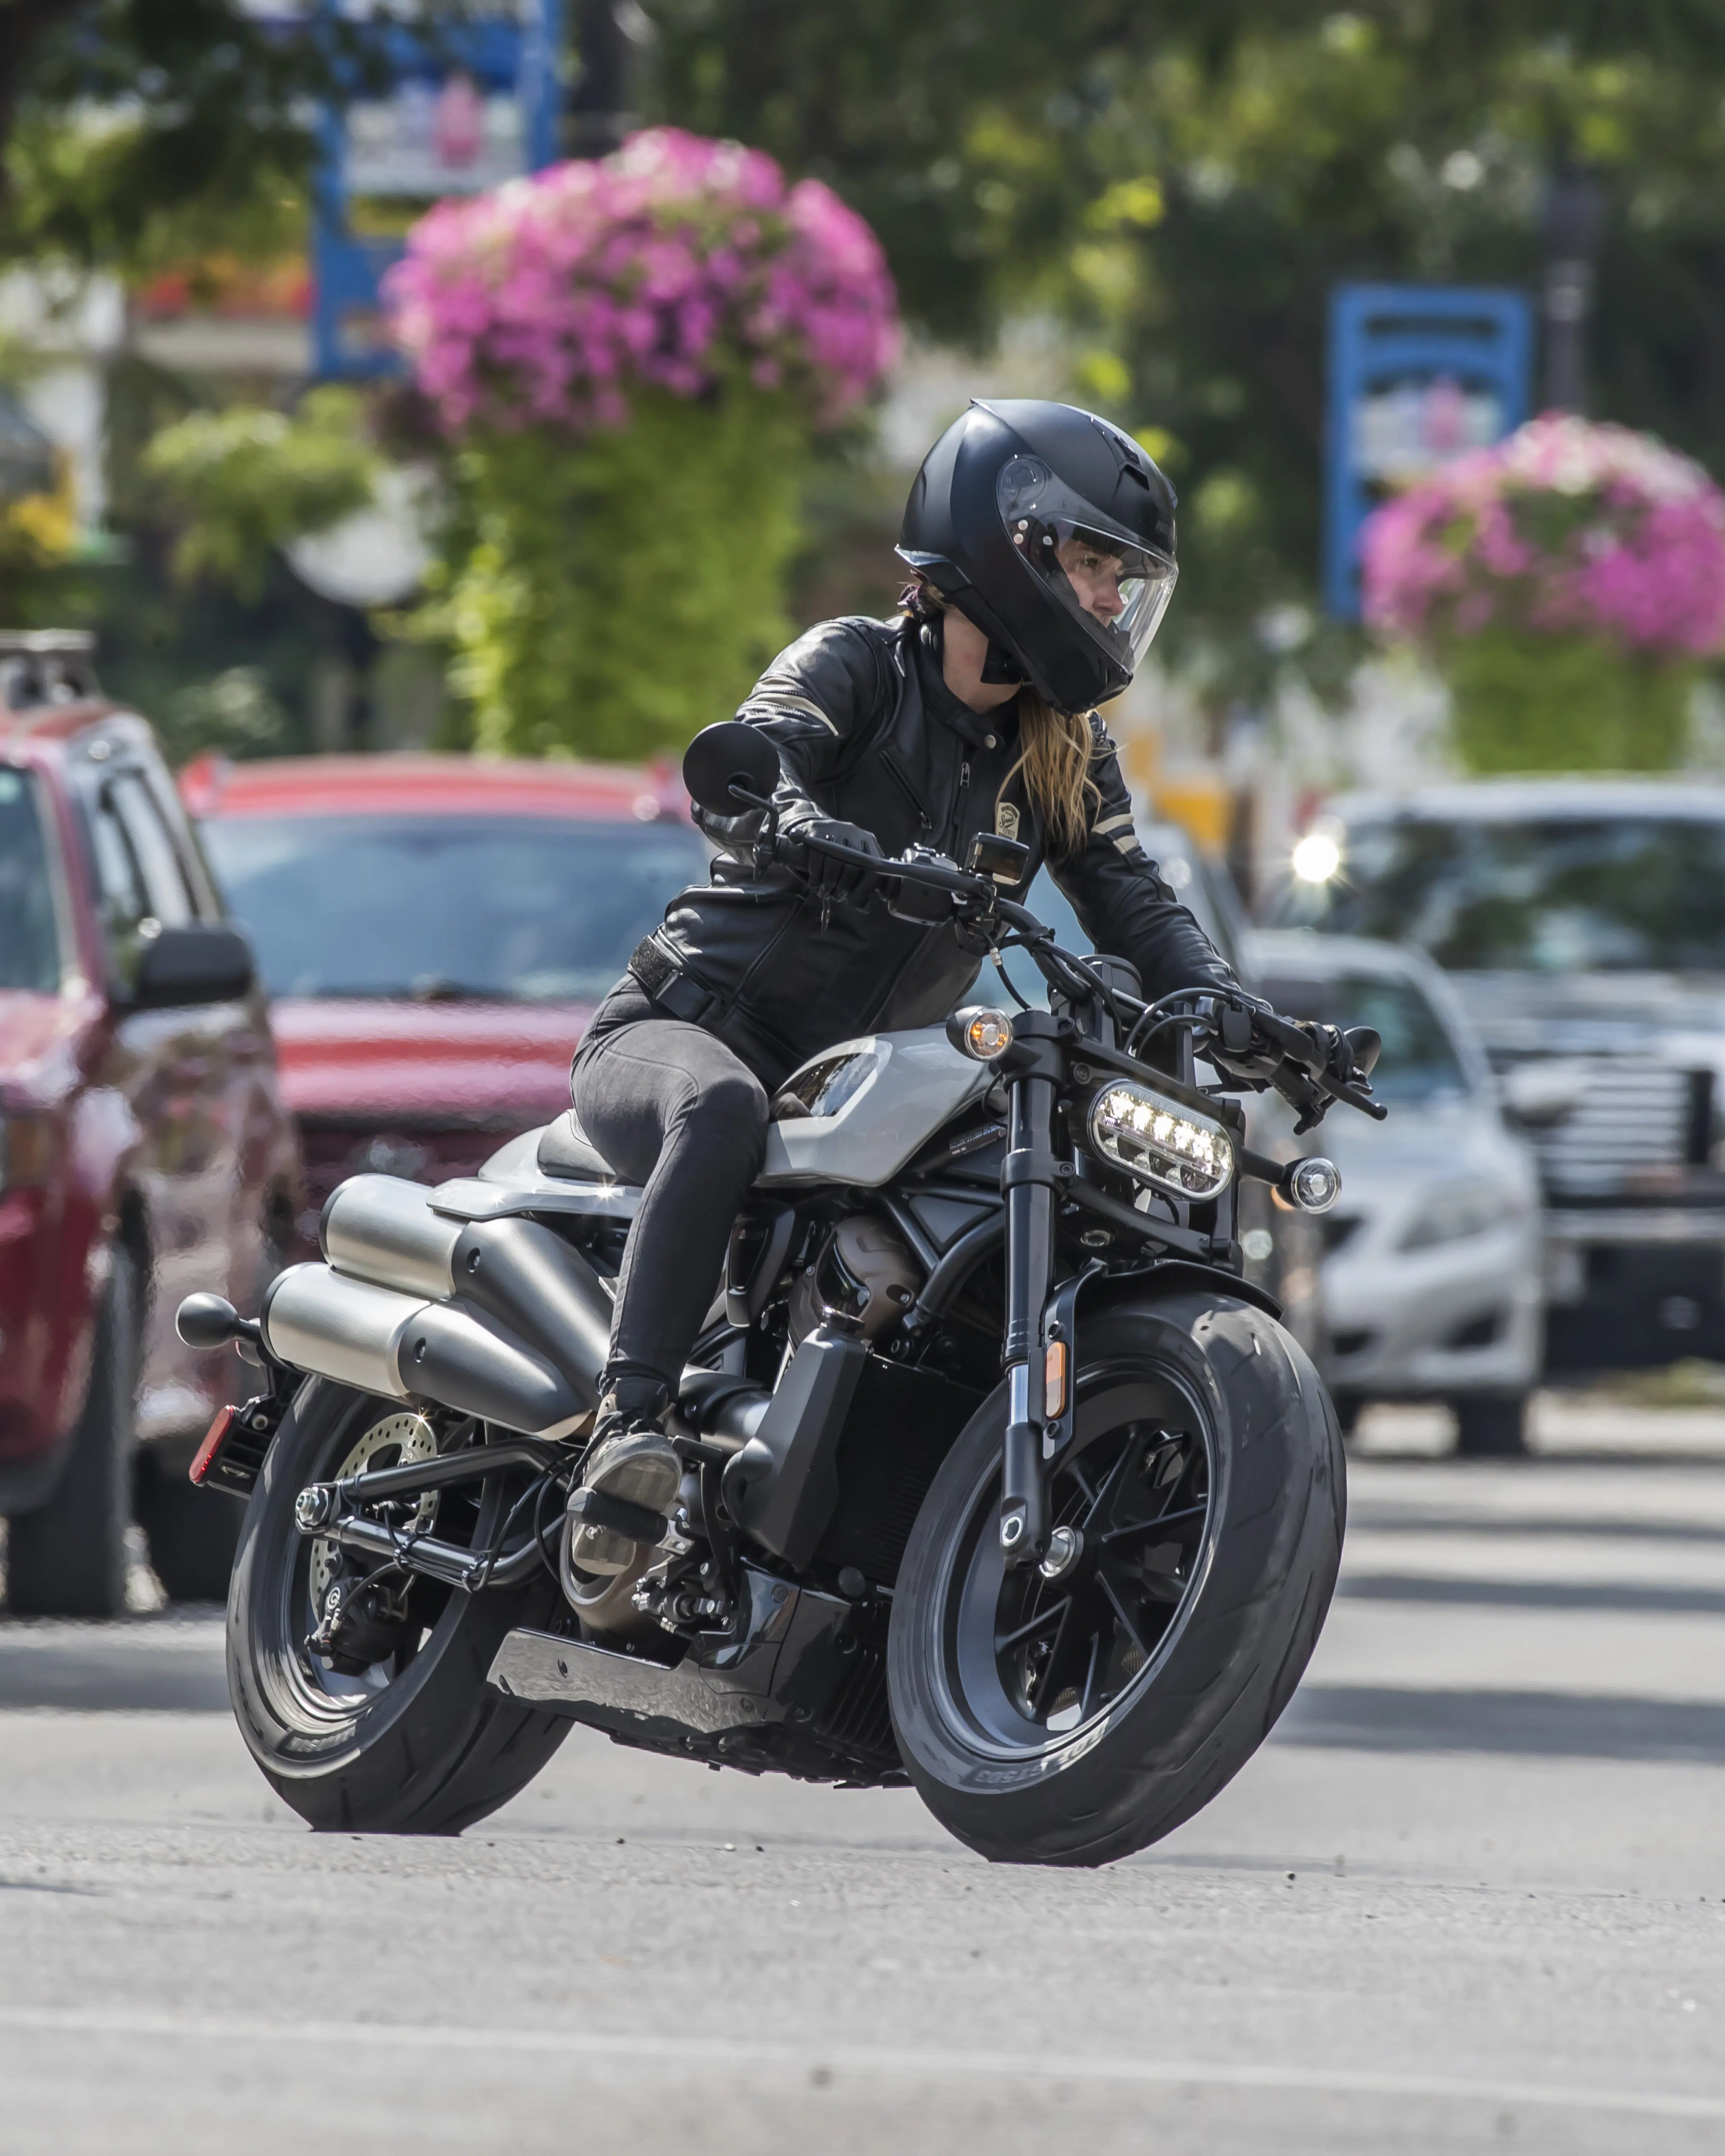 Stopping and turning at low speeds are no secrets to the Sportster S.